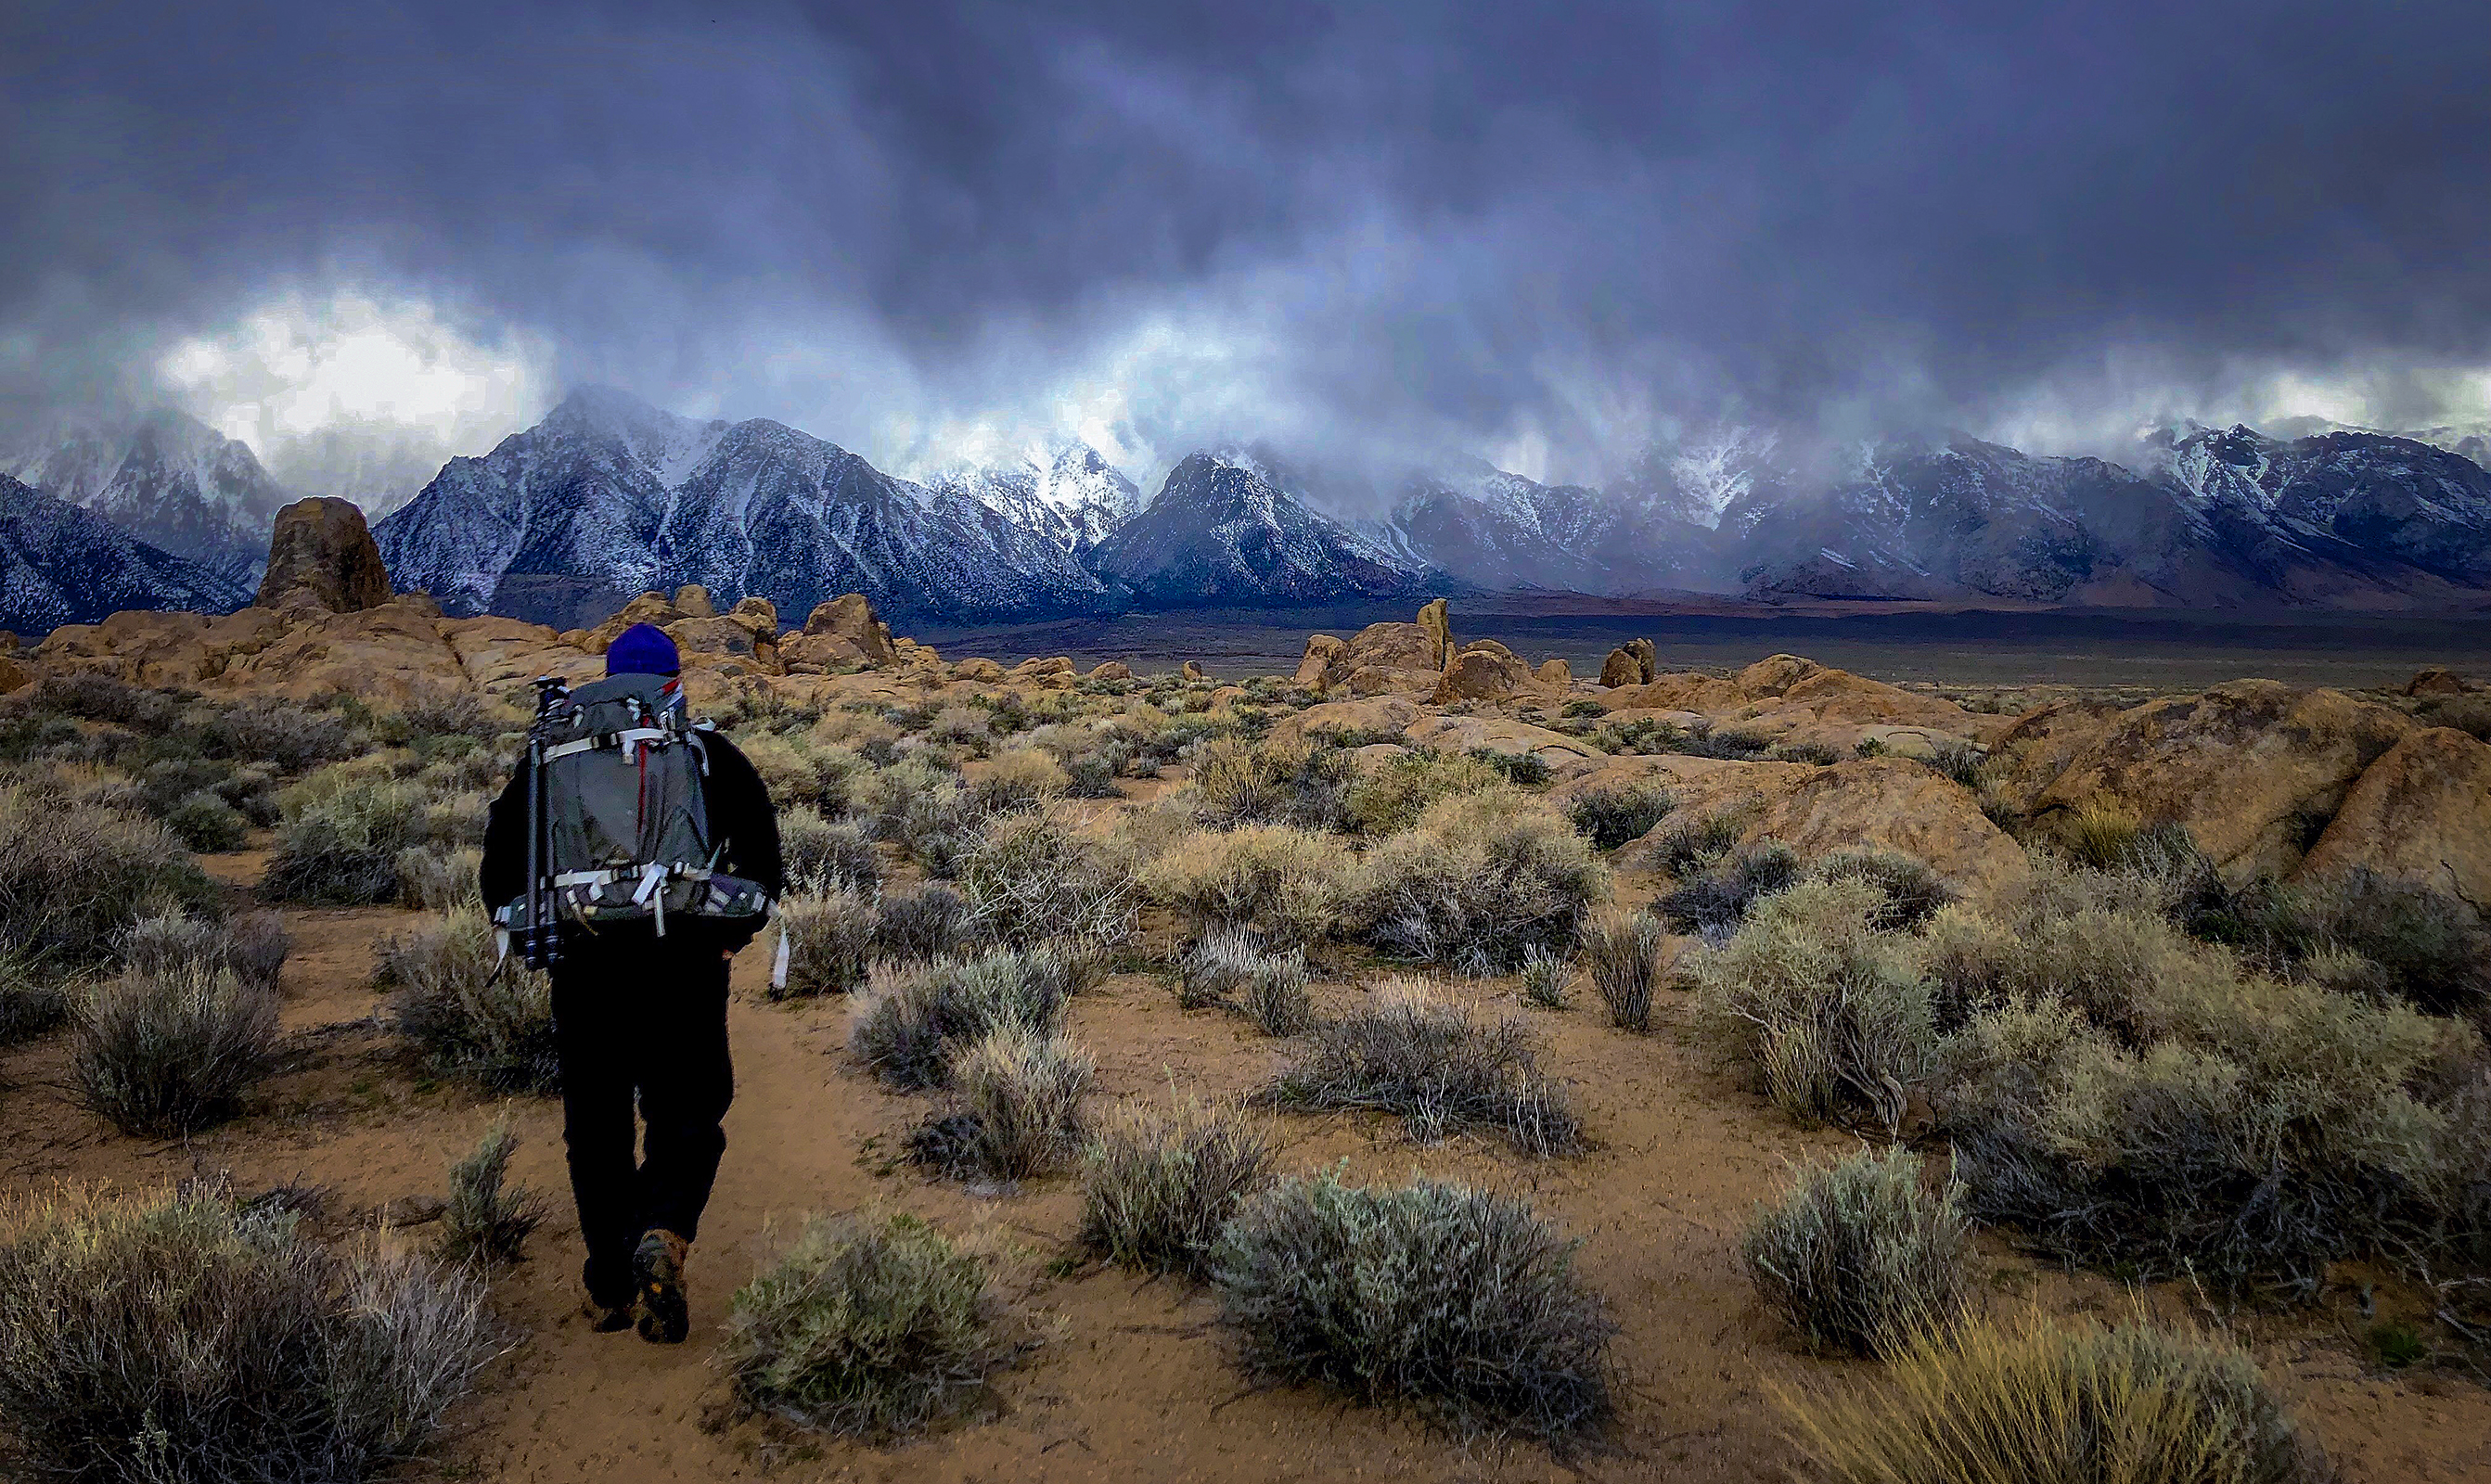 Walking in the Alabama Hills during a stormy day